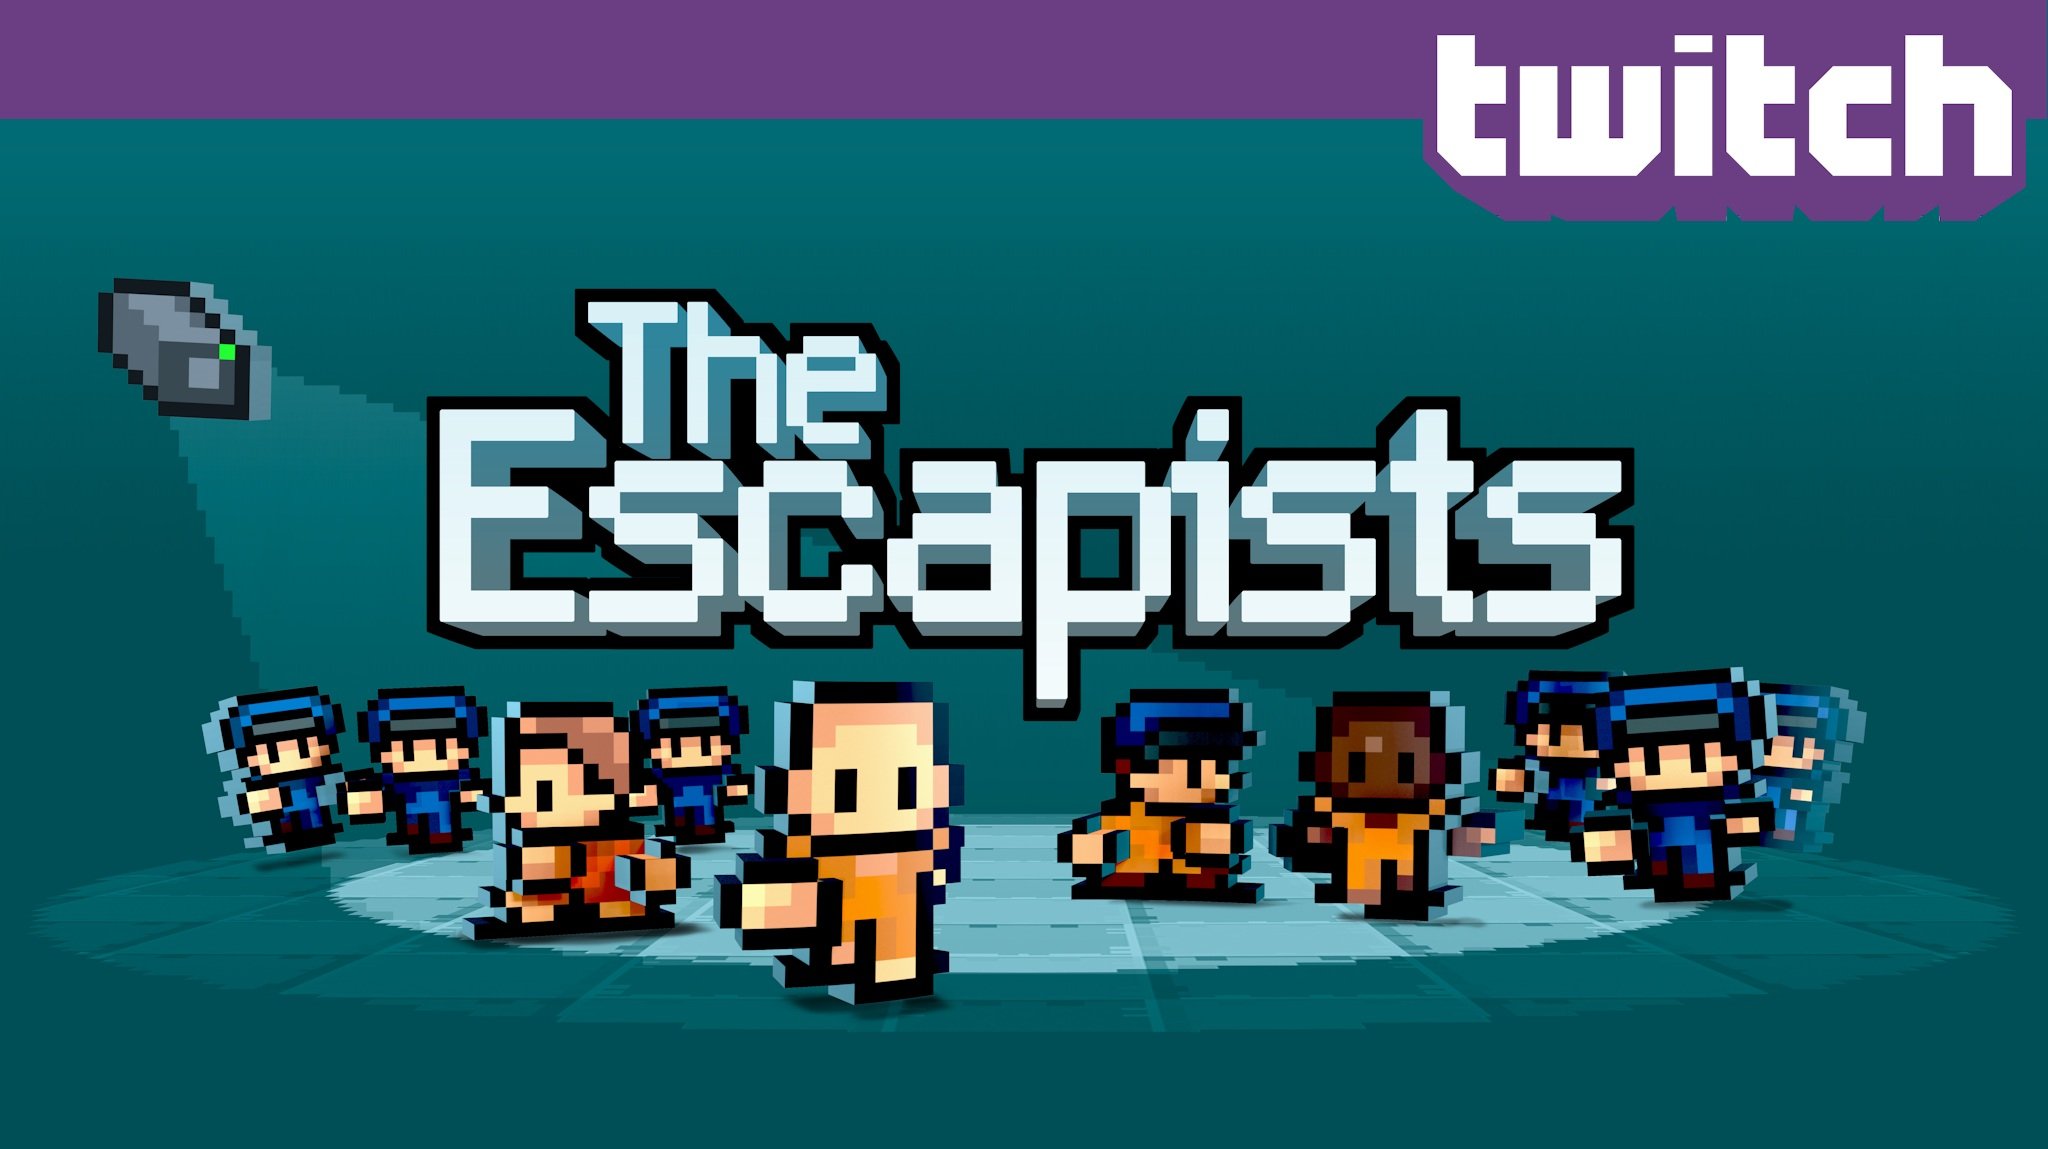 Join us on Twitch tonight for a first look at The Escapists for Xbox One